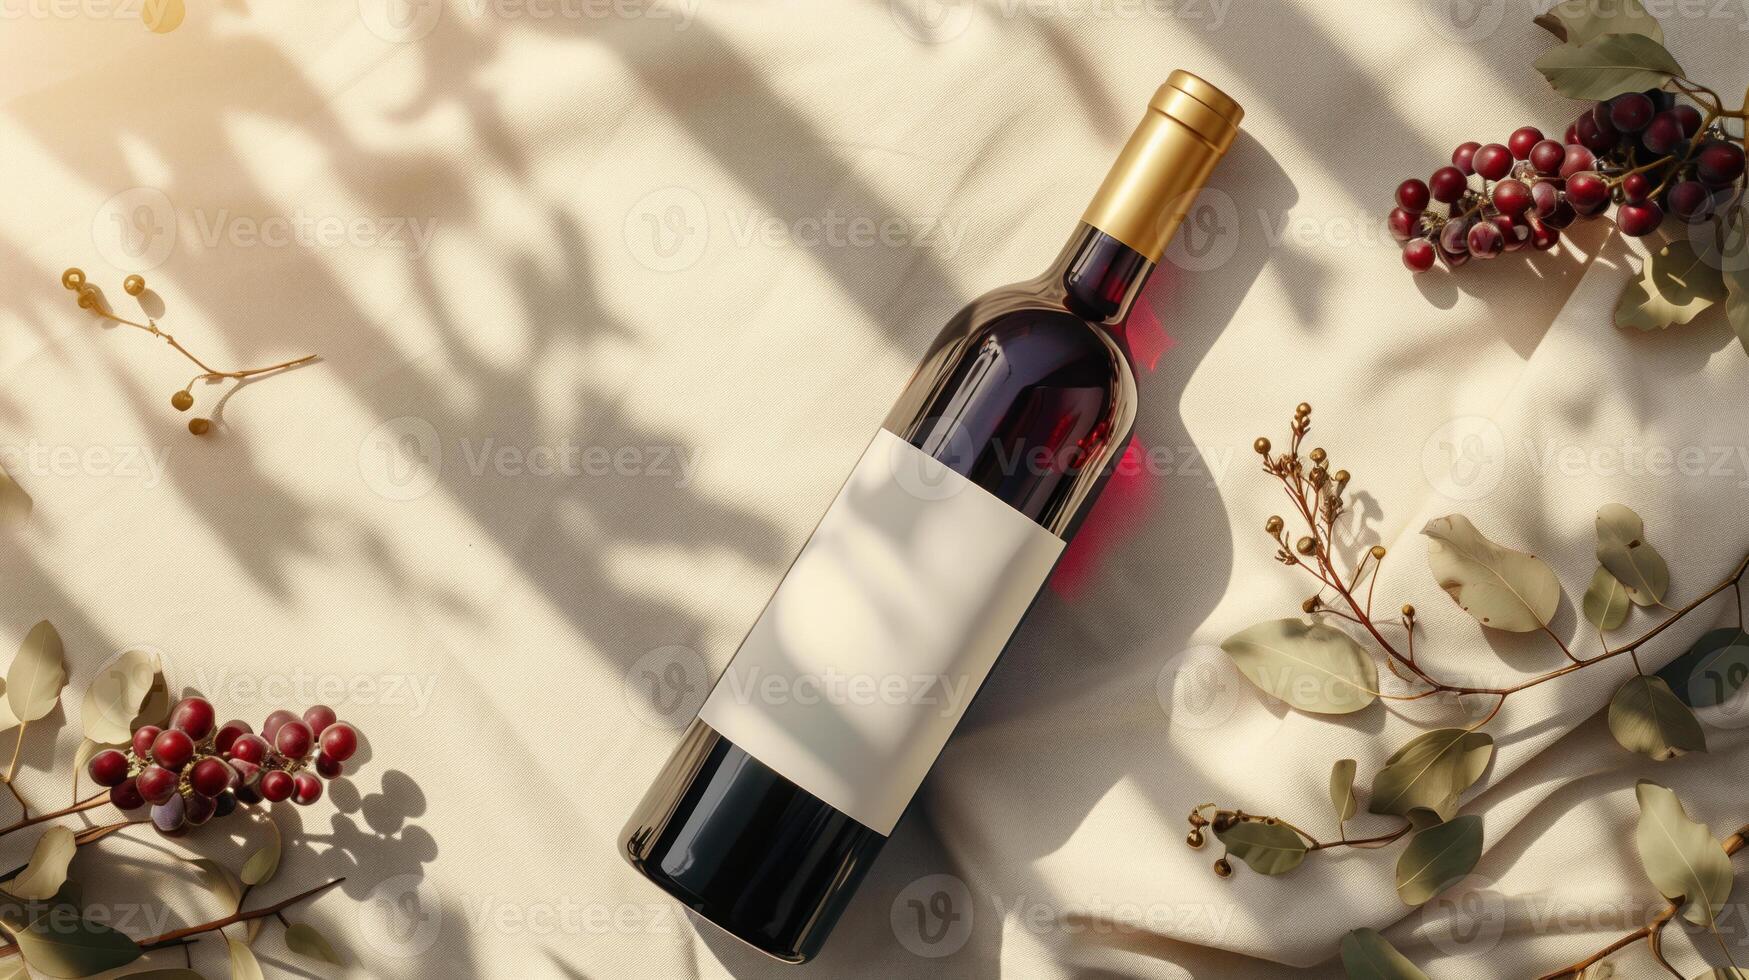 Flat lay of a red wine bottle with blank label surrounded by eucalyptus and berries in natural sunlight. photo